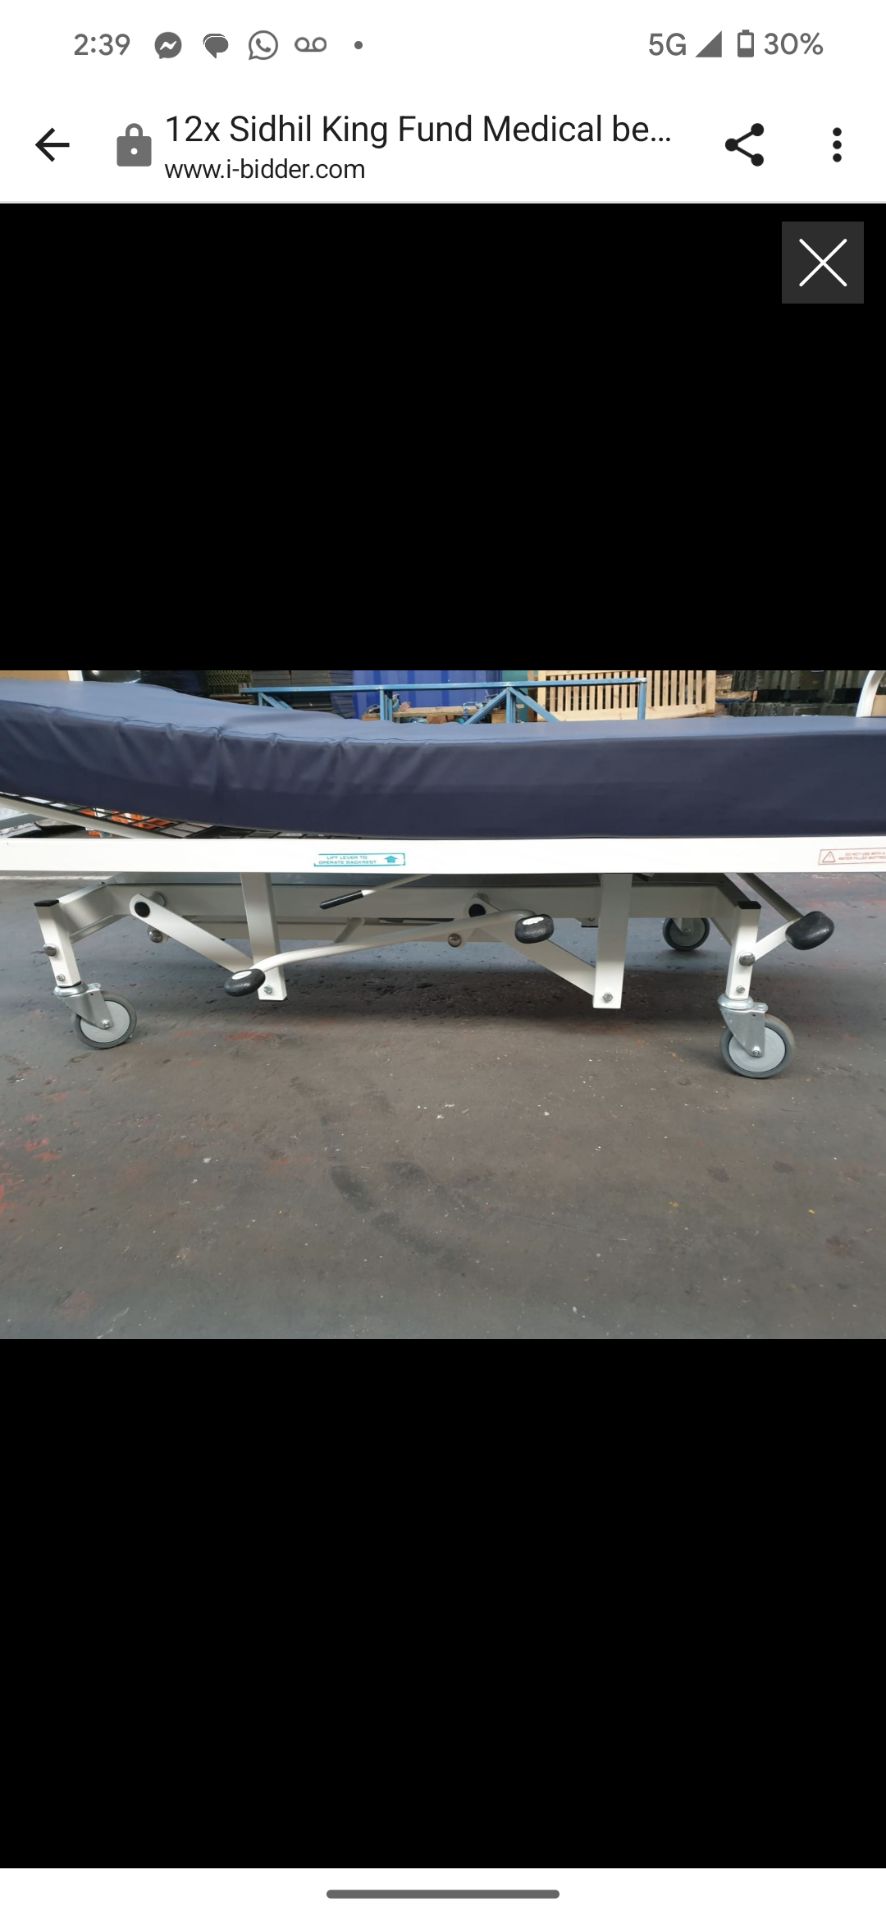 SIDHL 2 WAY TILT, HYDRAULIC LIFT HOSPITAL BED WITH MATTRESS RRP £1685 (NO VAT ON HAMMER) - Image 7 of 7